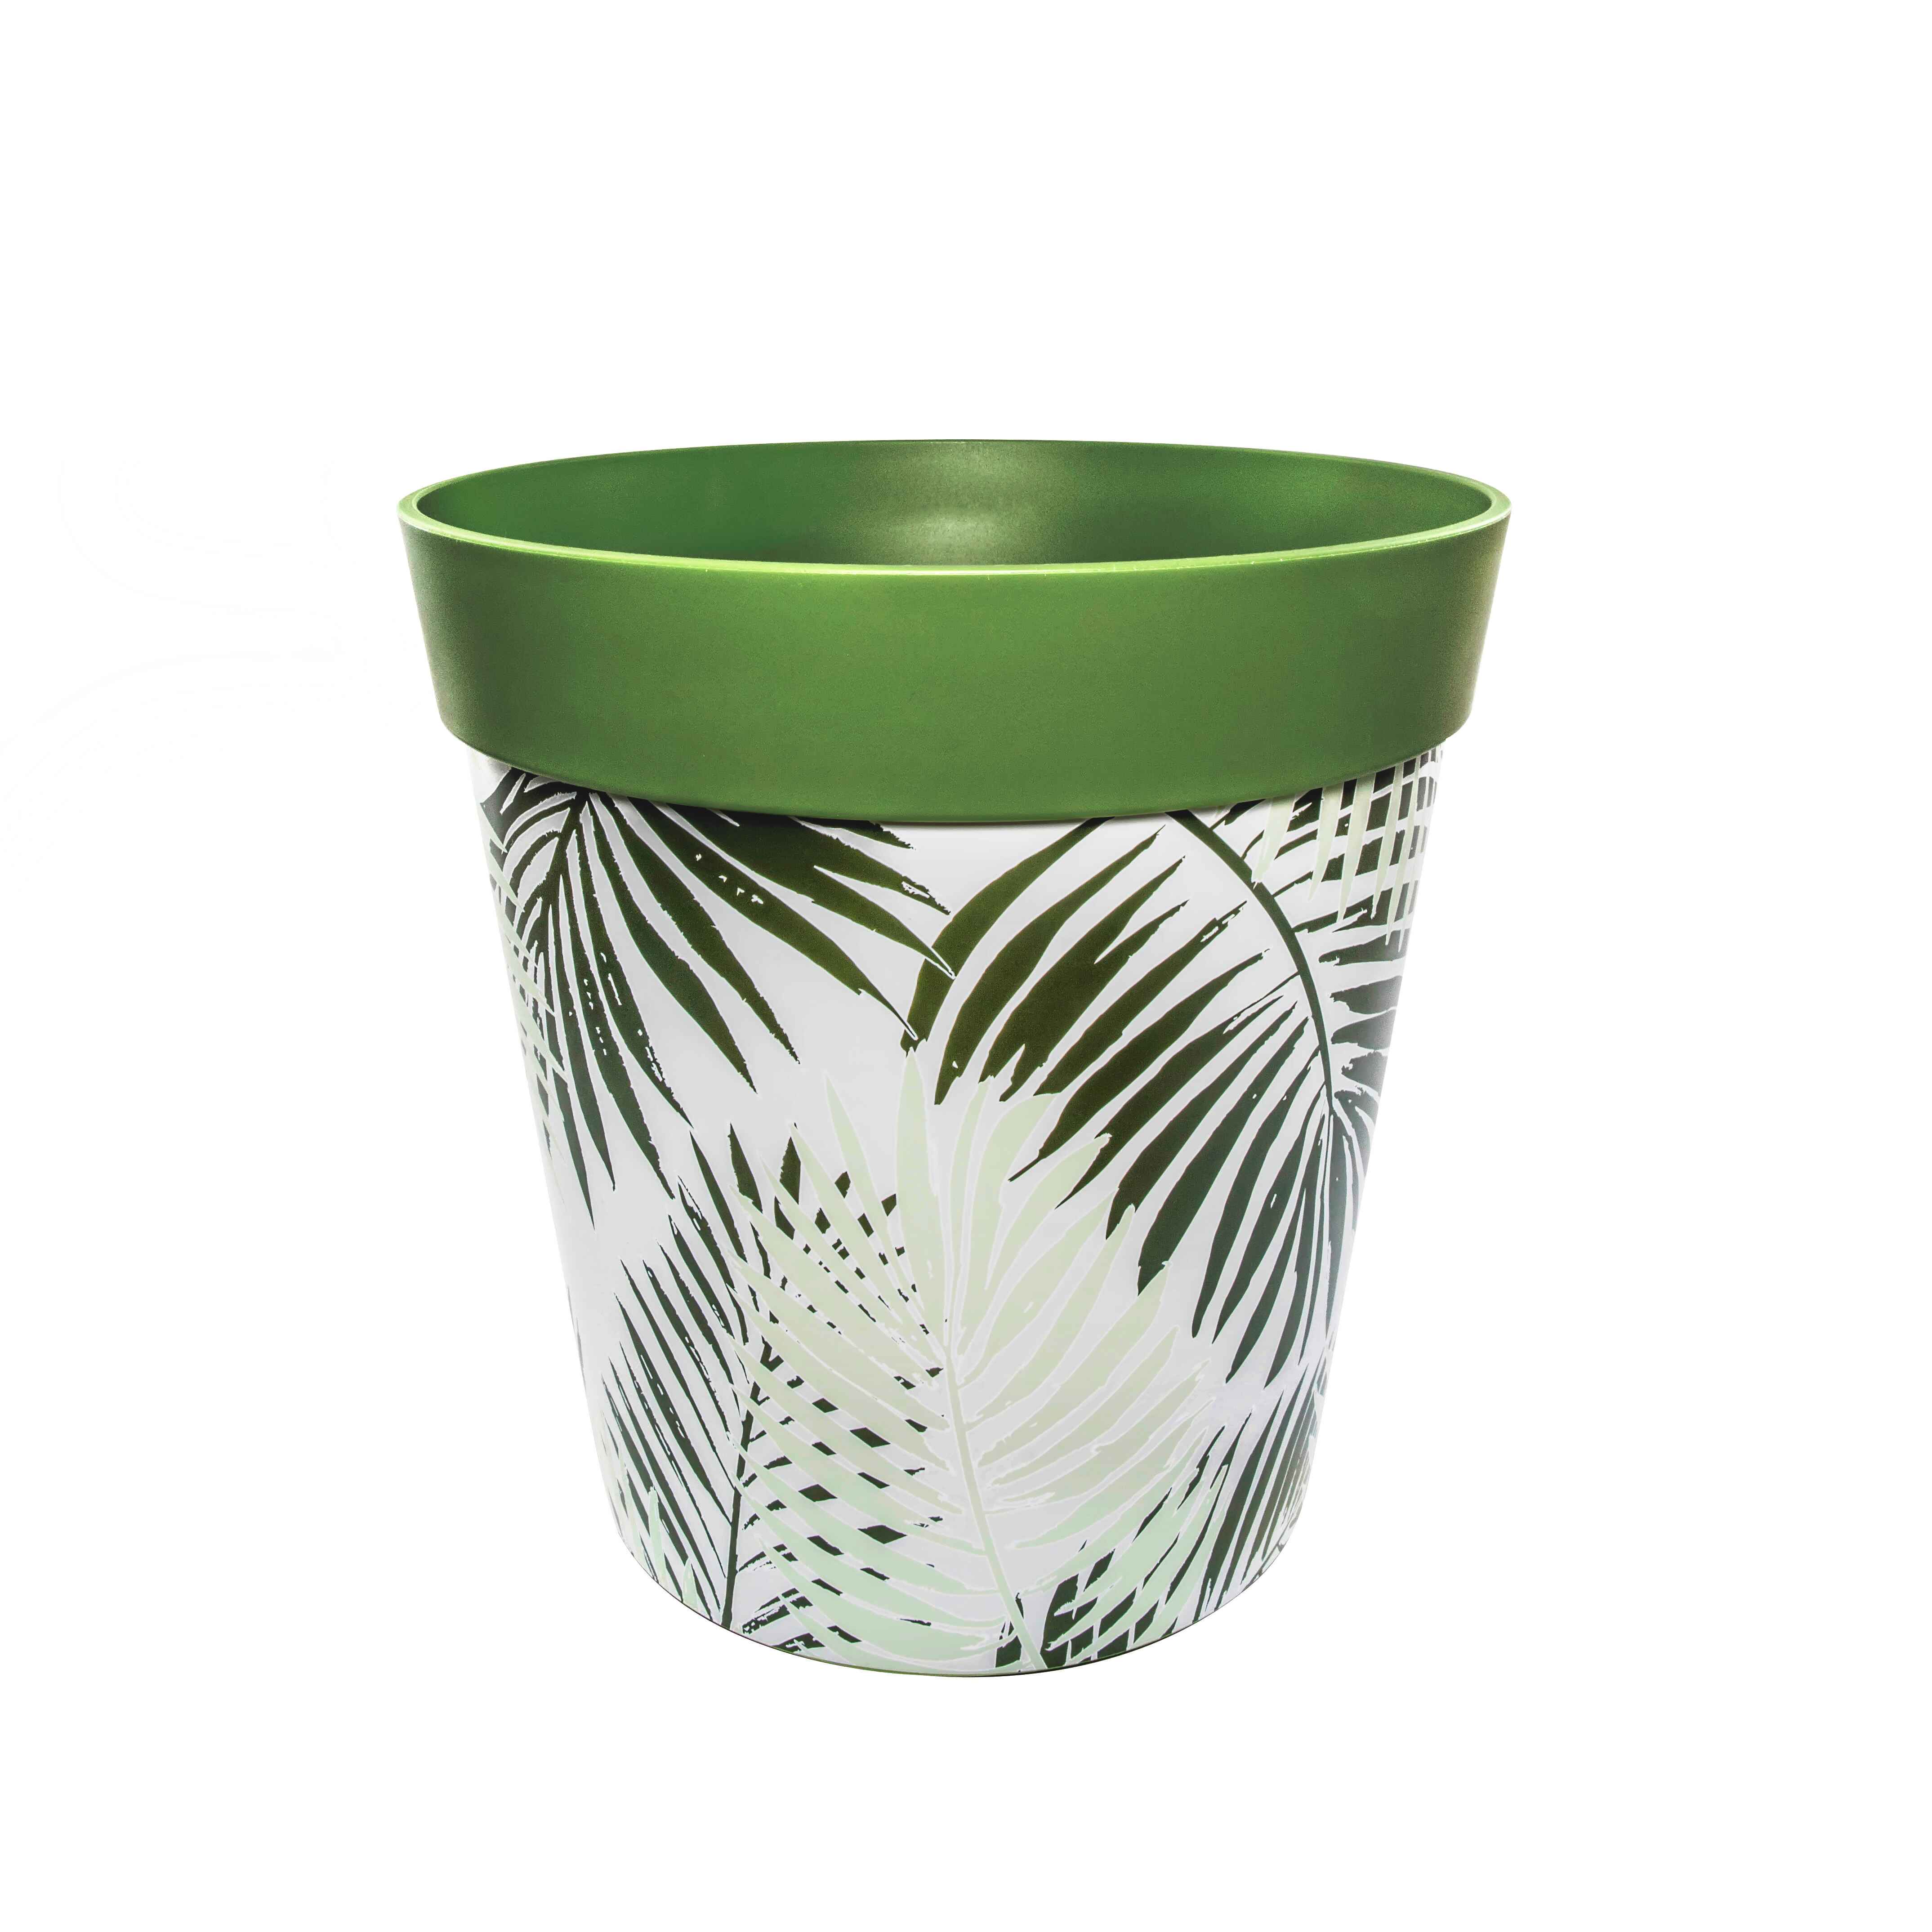 Picture of Large 25cm Plastic Green Fern Pattern Indoor/Outdoor Flowerpots with Saucers